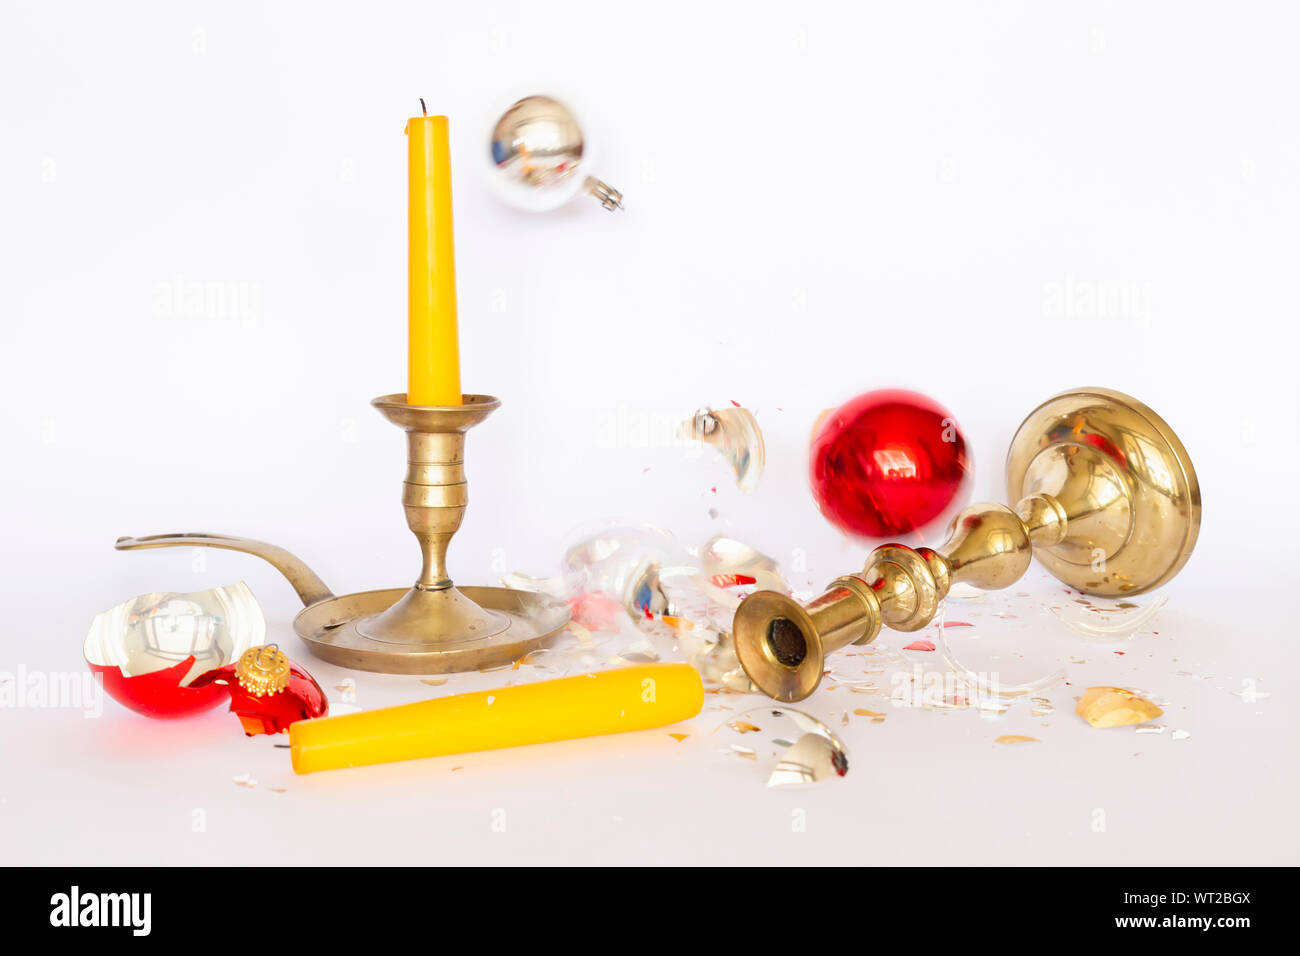 Front view of falling and shattered red and silver Christmas baubles and two bronze candleholders with a yellow candle on white background Stock Photo